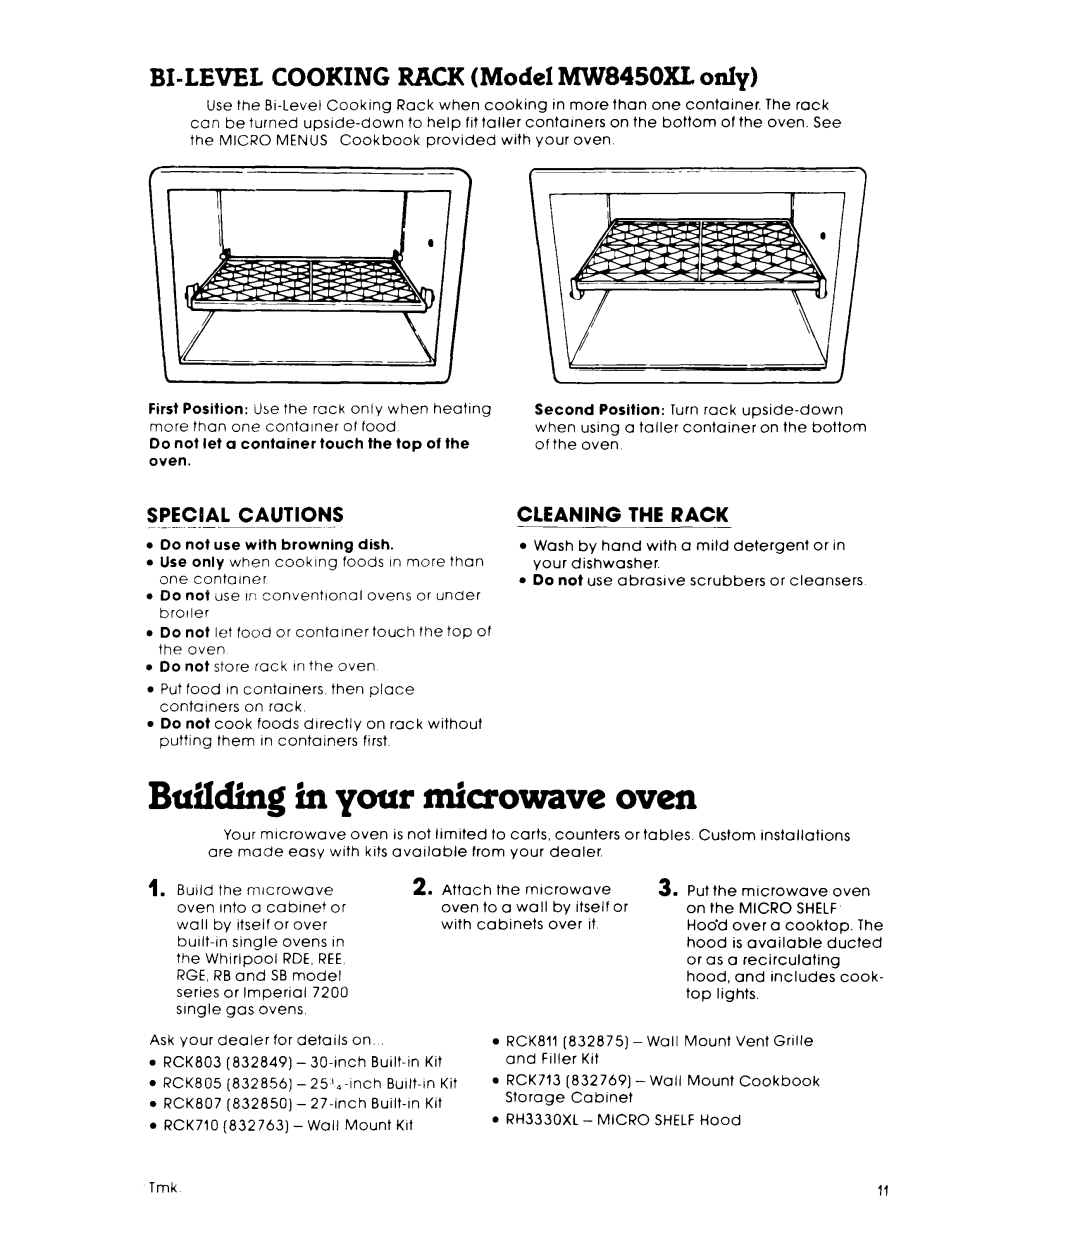 Whirlpool MW8400XL, MW8450XL Building in your miaowave oven, BI-LEVELCOOKING RACK Model MW845OXL only, Special Cautions 